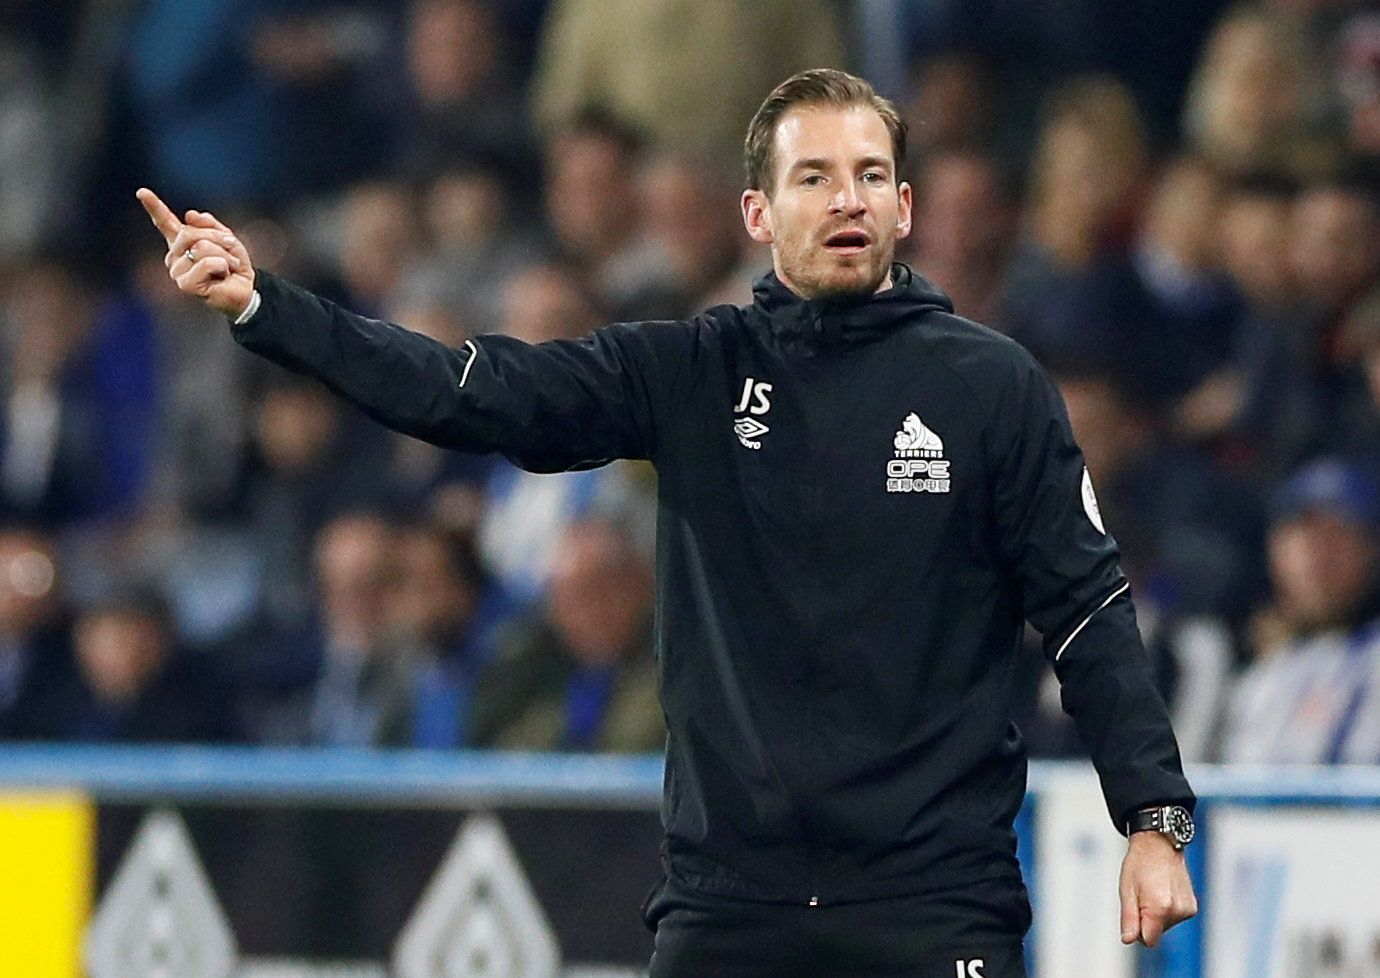 Soccer Football - Premier League - Huddersfield Town v Wolverhampton Wanderers - John Smith's Stadium, Huddersfield, Britain - February 26, 2019  Huddersfield Town manager Jan Siewert             Action Images via Reuters/Jason Cairnduff  EDITORIAL USE ONLY. No use with unauthorized audio, video, data, fixture lists, club/league logos or 